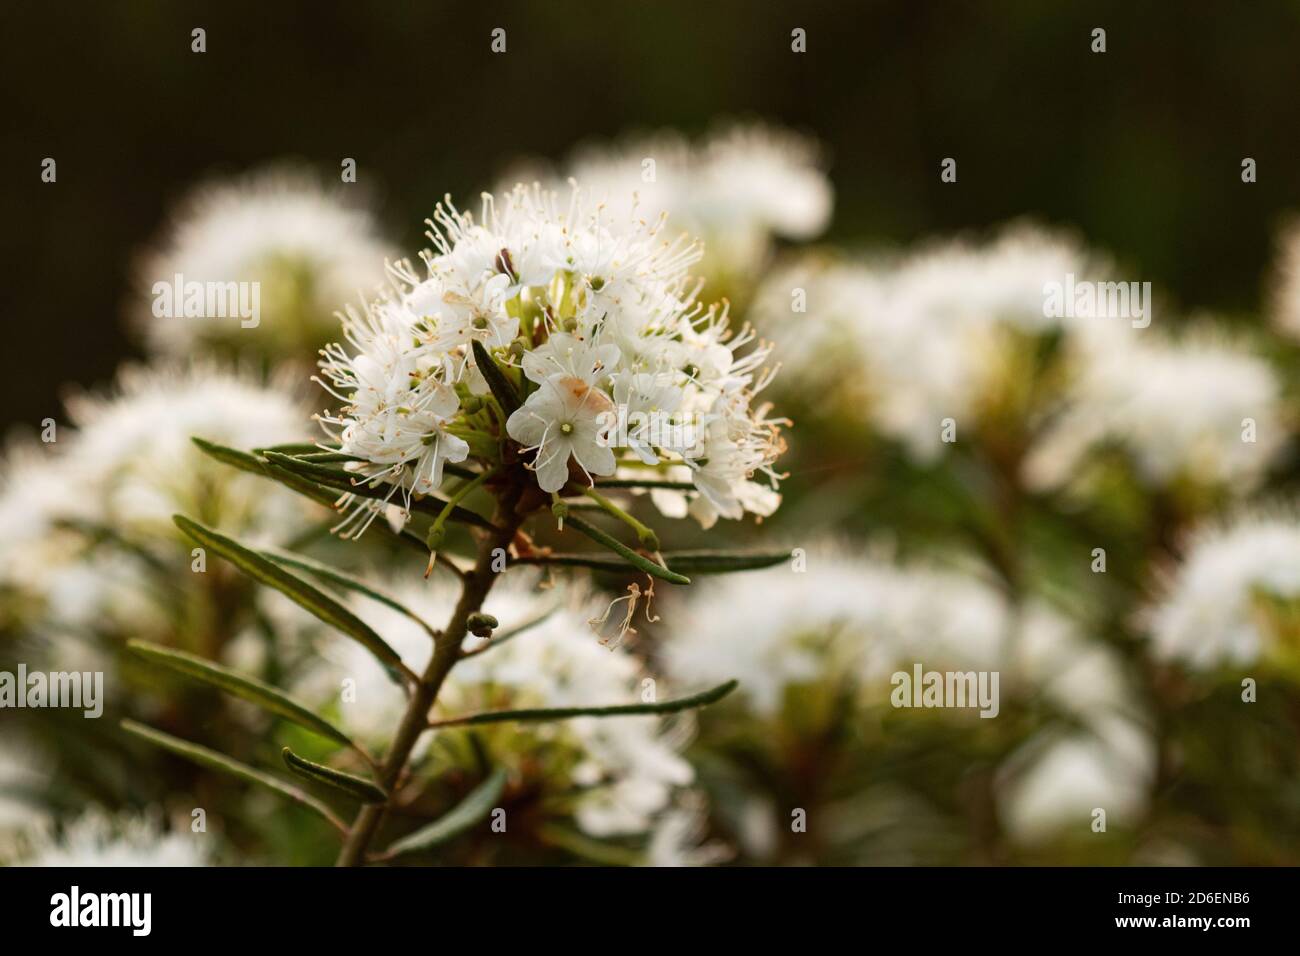 Marsh labrador tea, Rhododendron tomentosum also know as Wild rosemary as natural remedy flowering during sunset in Estonian wild bog, Northern Europe Stock Photo